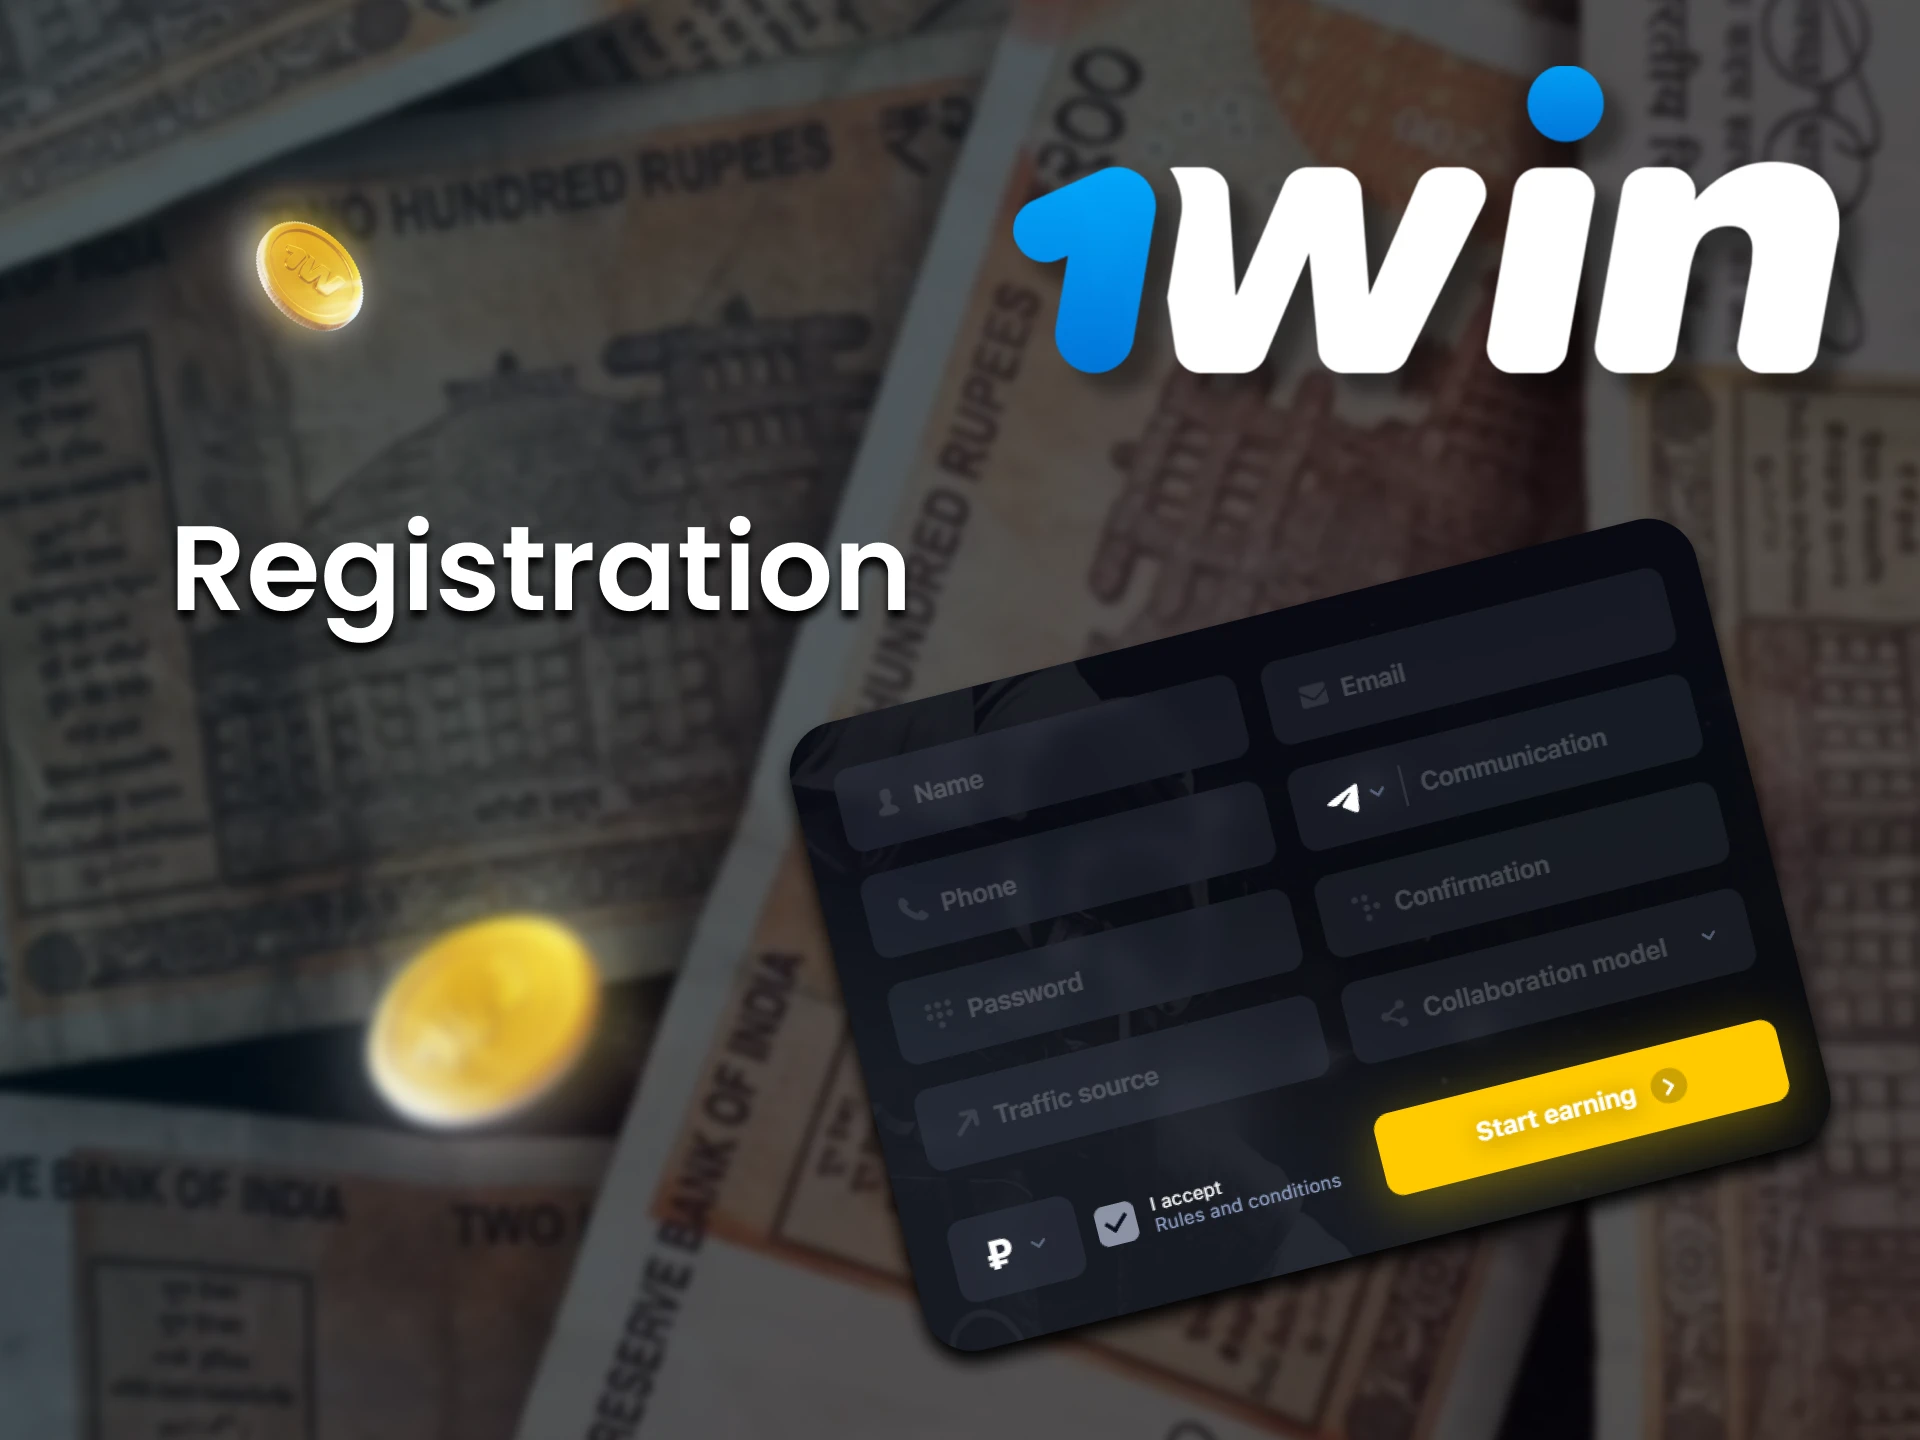 Go through the registration process in the affiliate program from 1win.